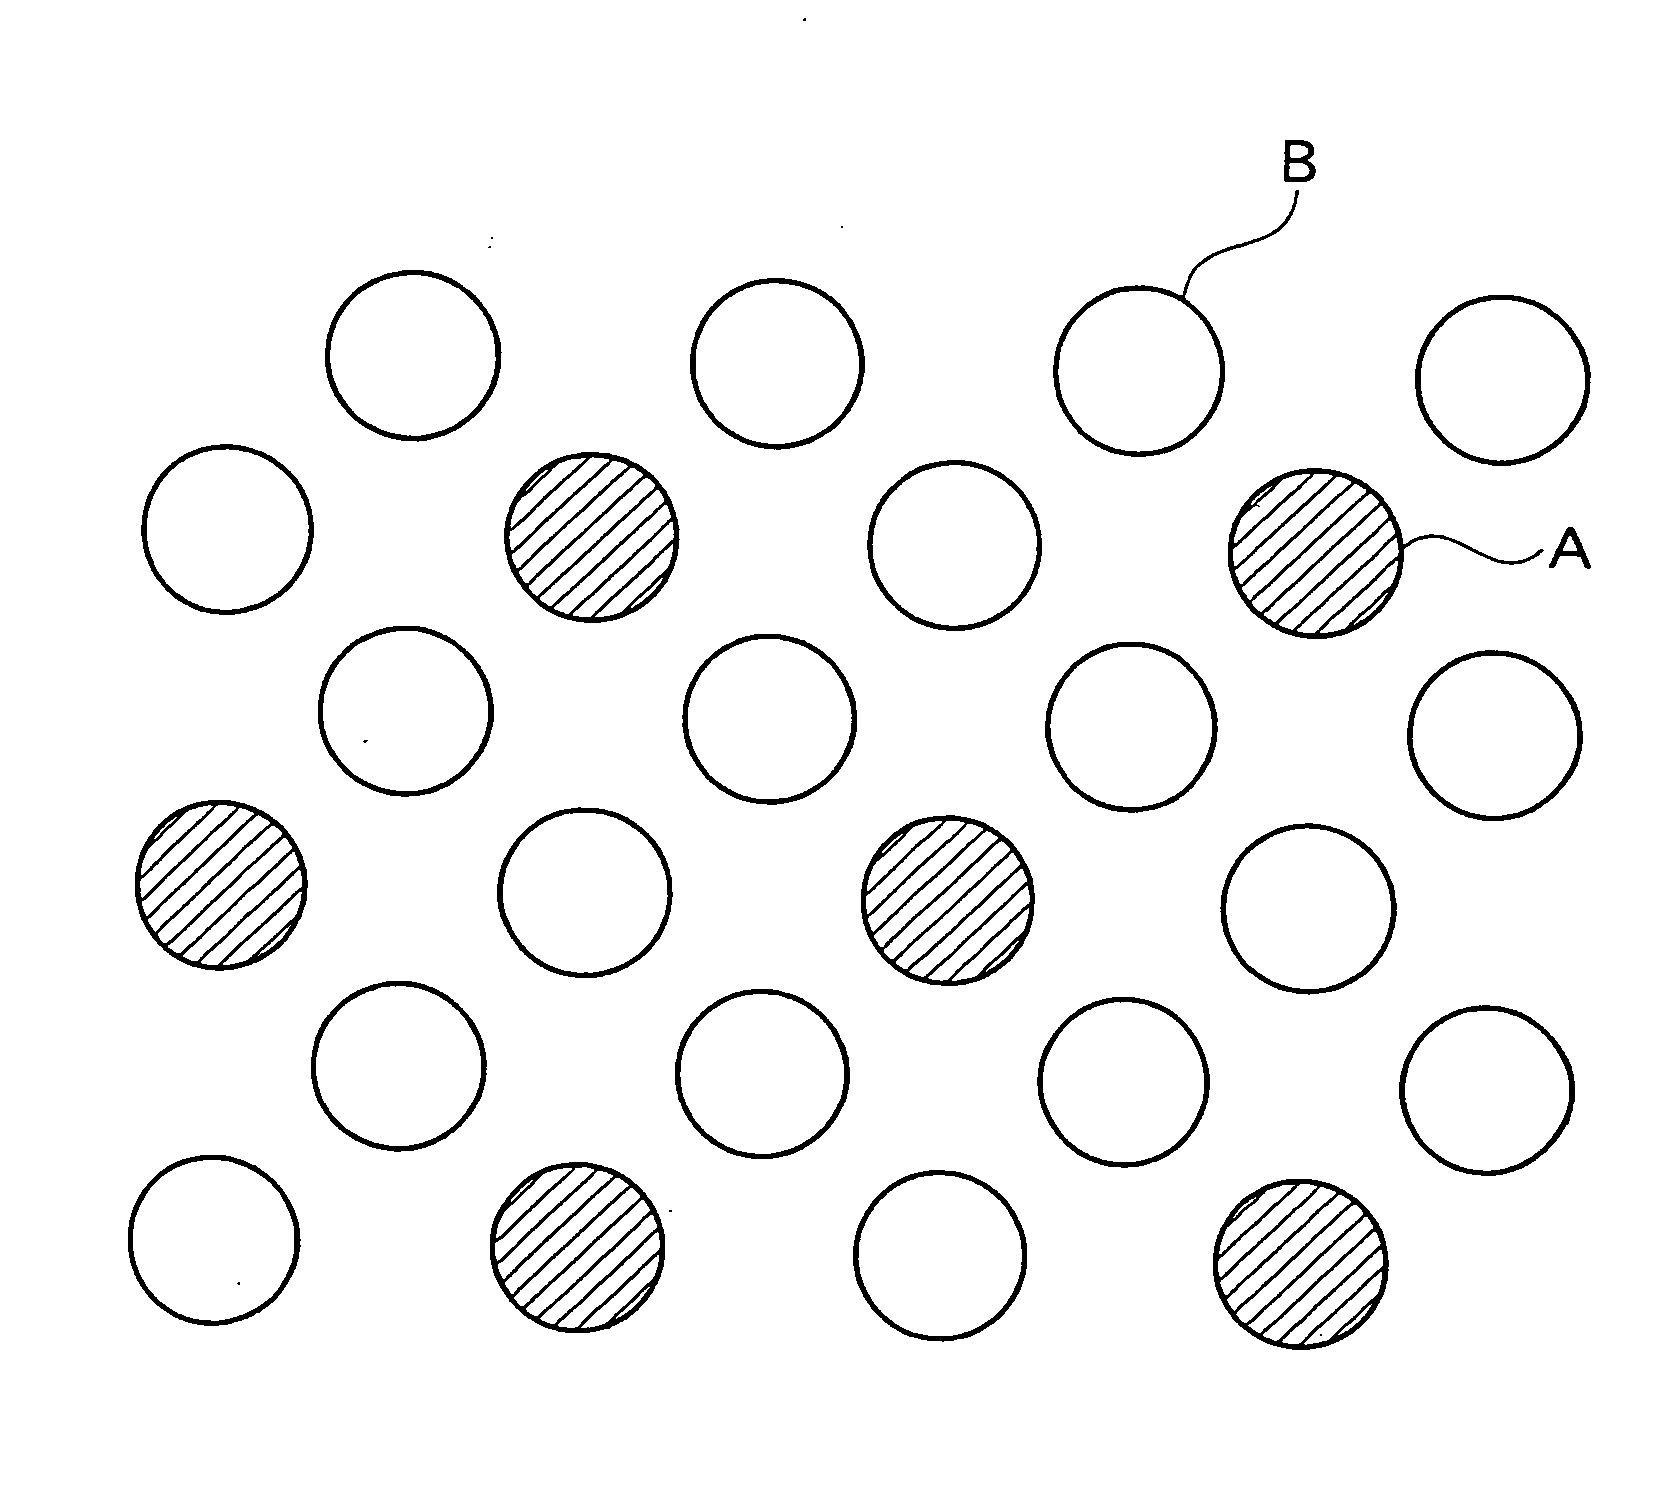 Mixed fiber and, stretch nonwoven fabric comprising said mixed fiber and method for manufacture thereof